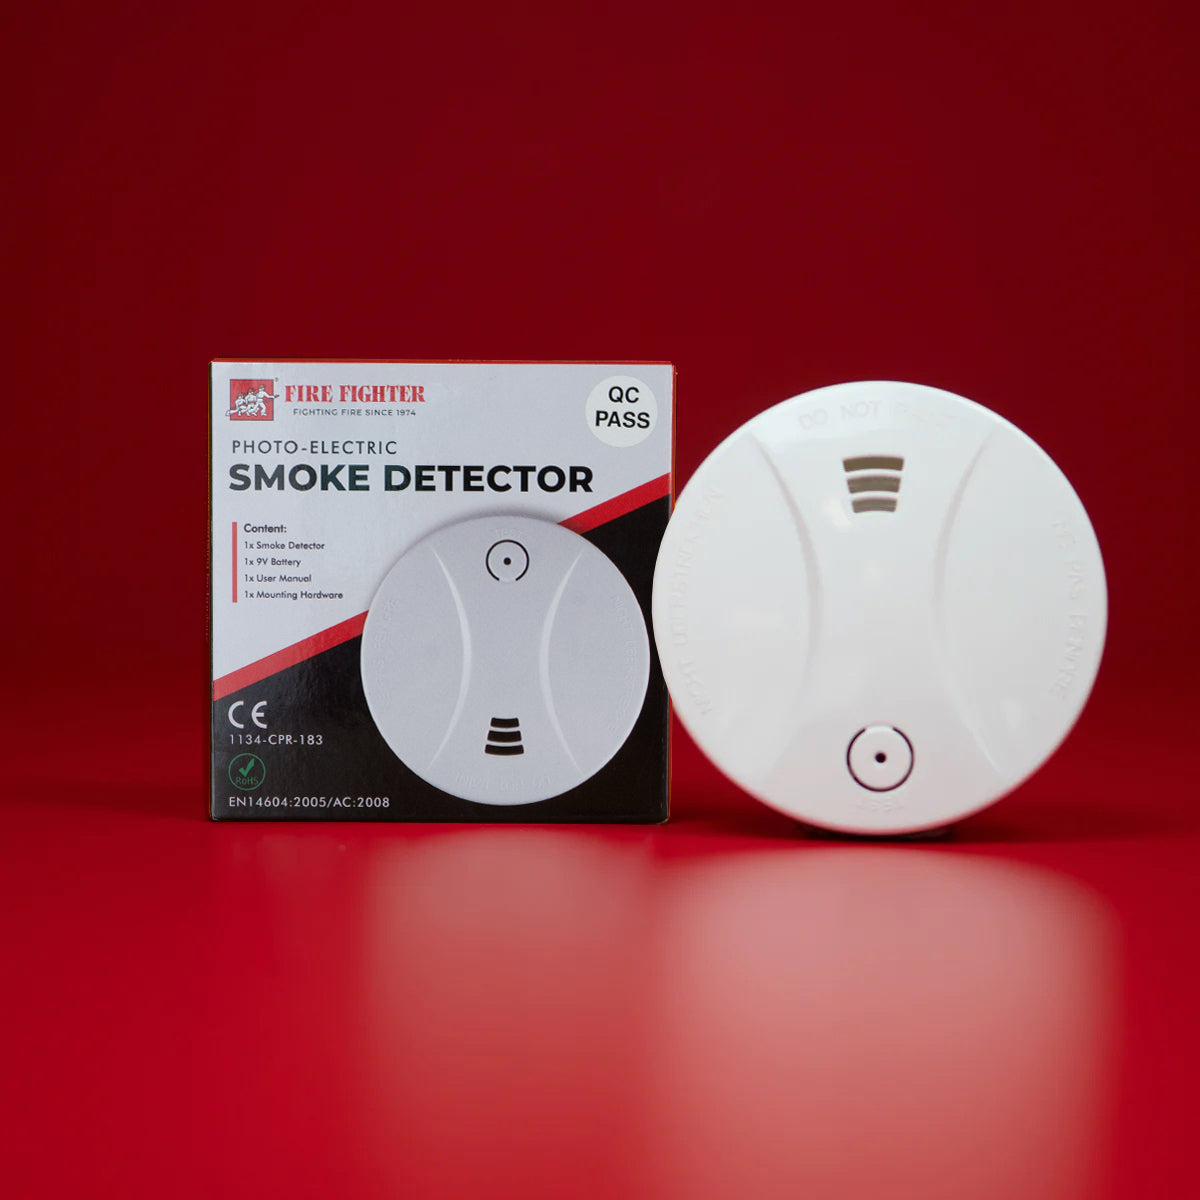 How Do Heat Detectors Work? - What's Their Real Purpose?